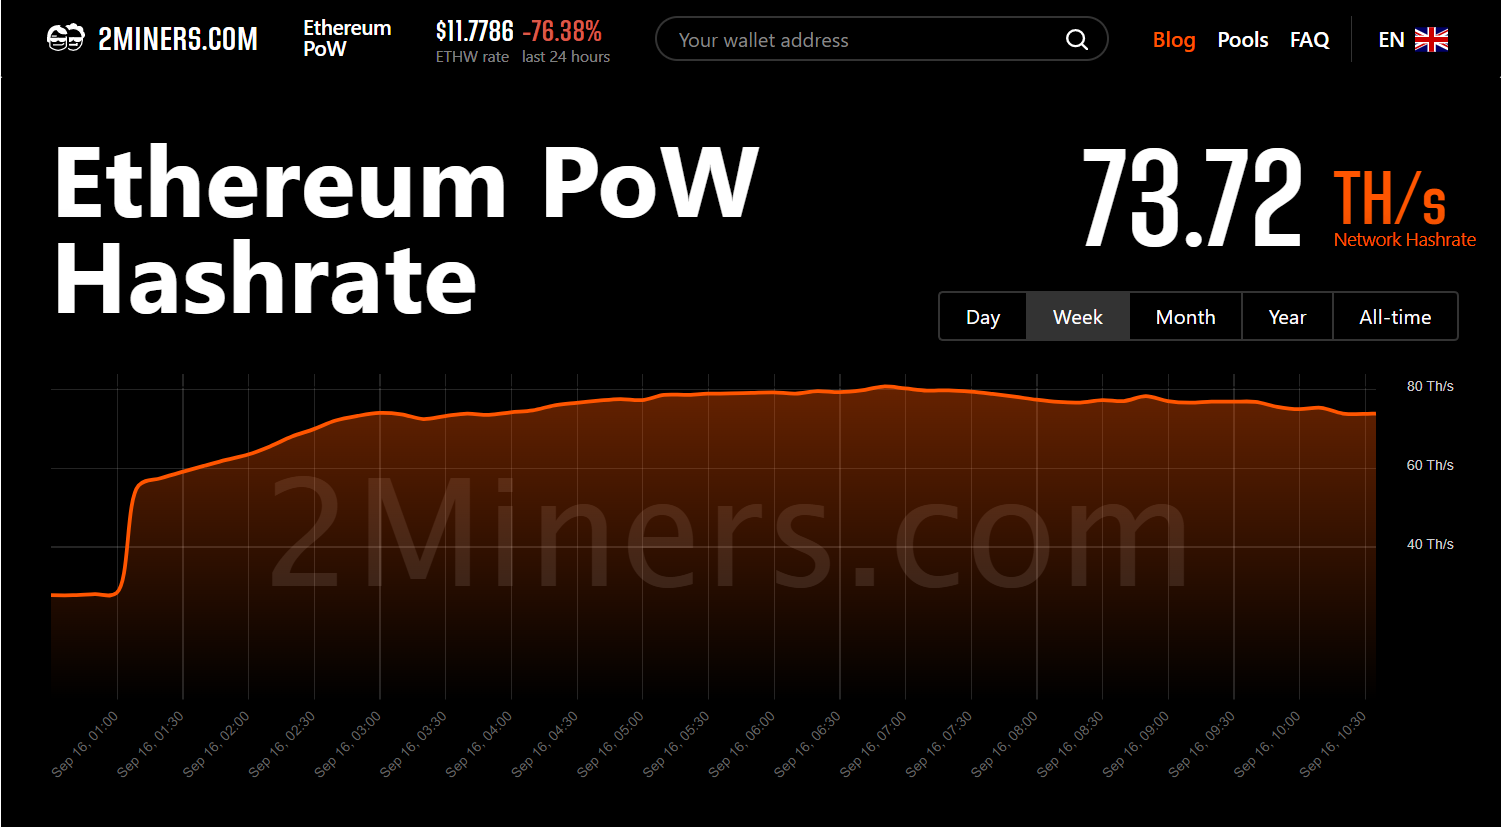 EthereumPoW (ETHW) hashrate at 11:54 am on September 16, 2022. Source: 2Miner